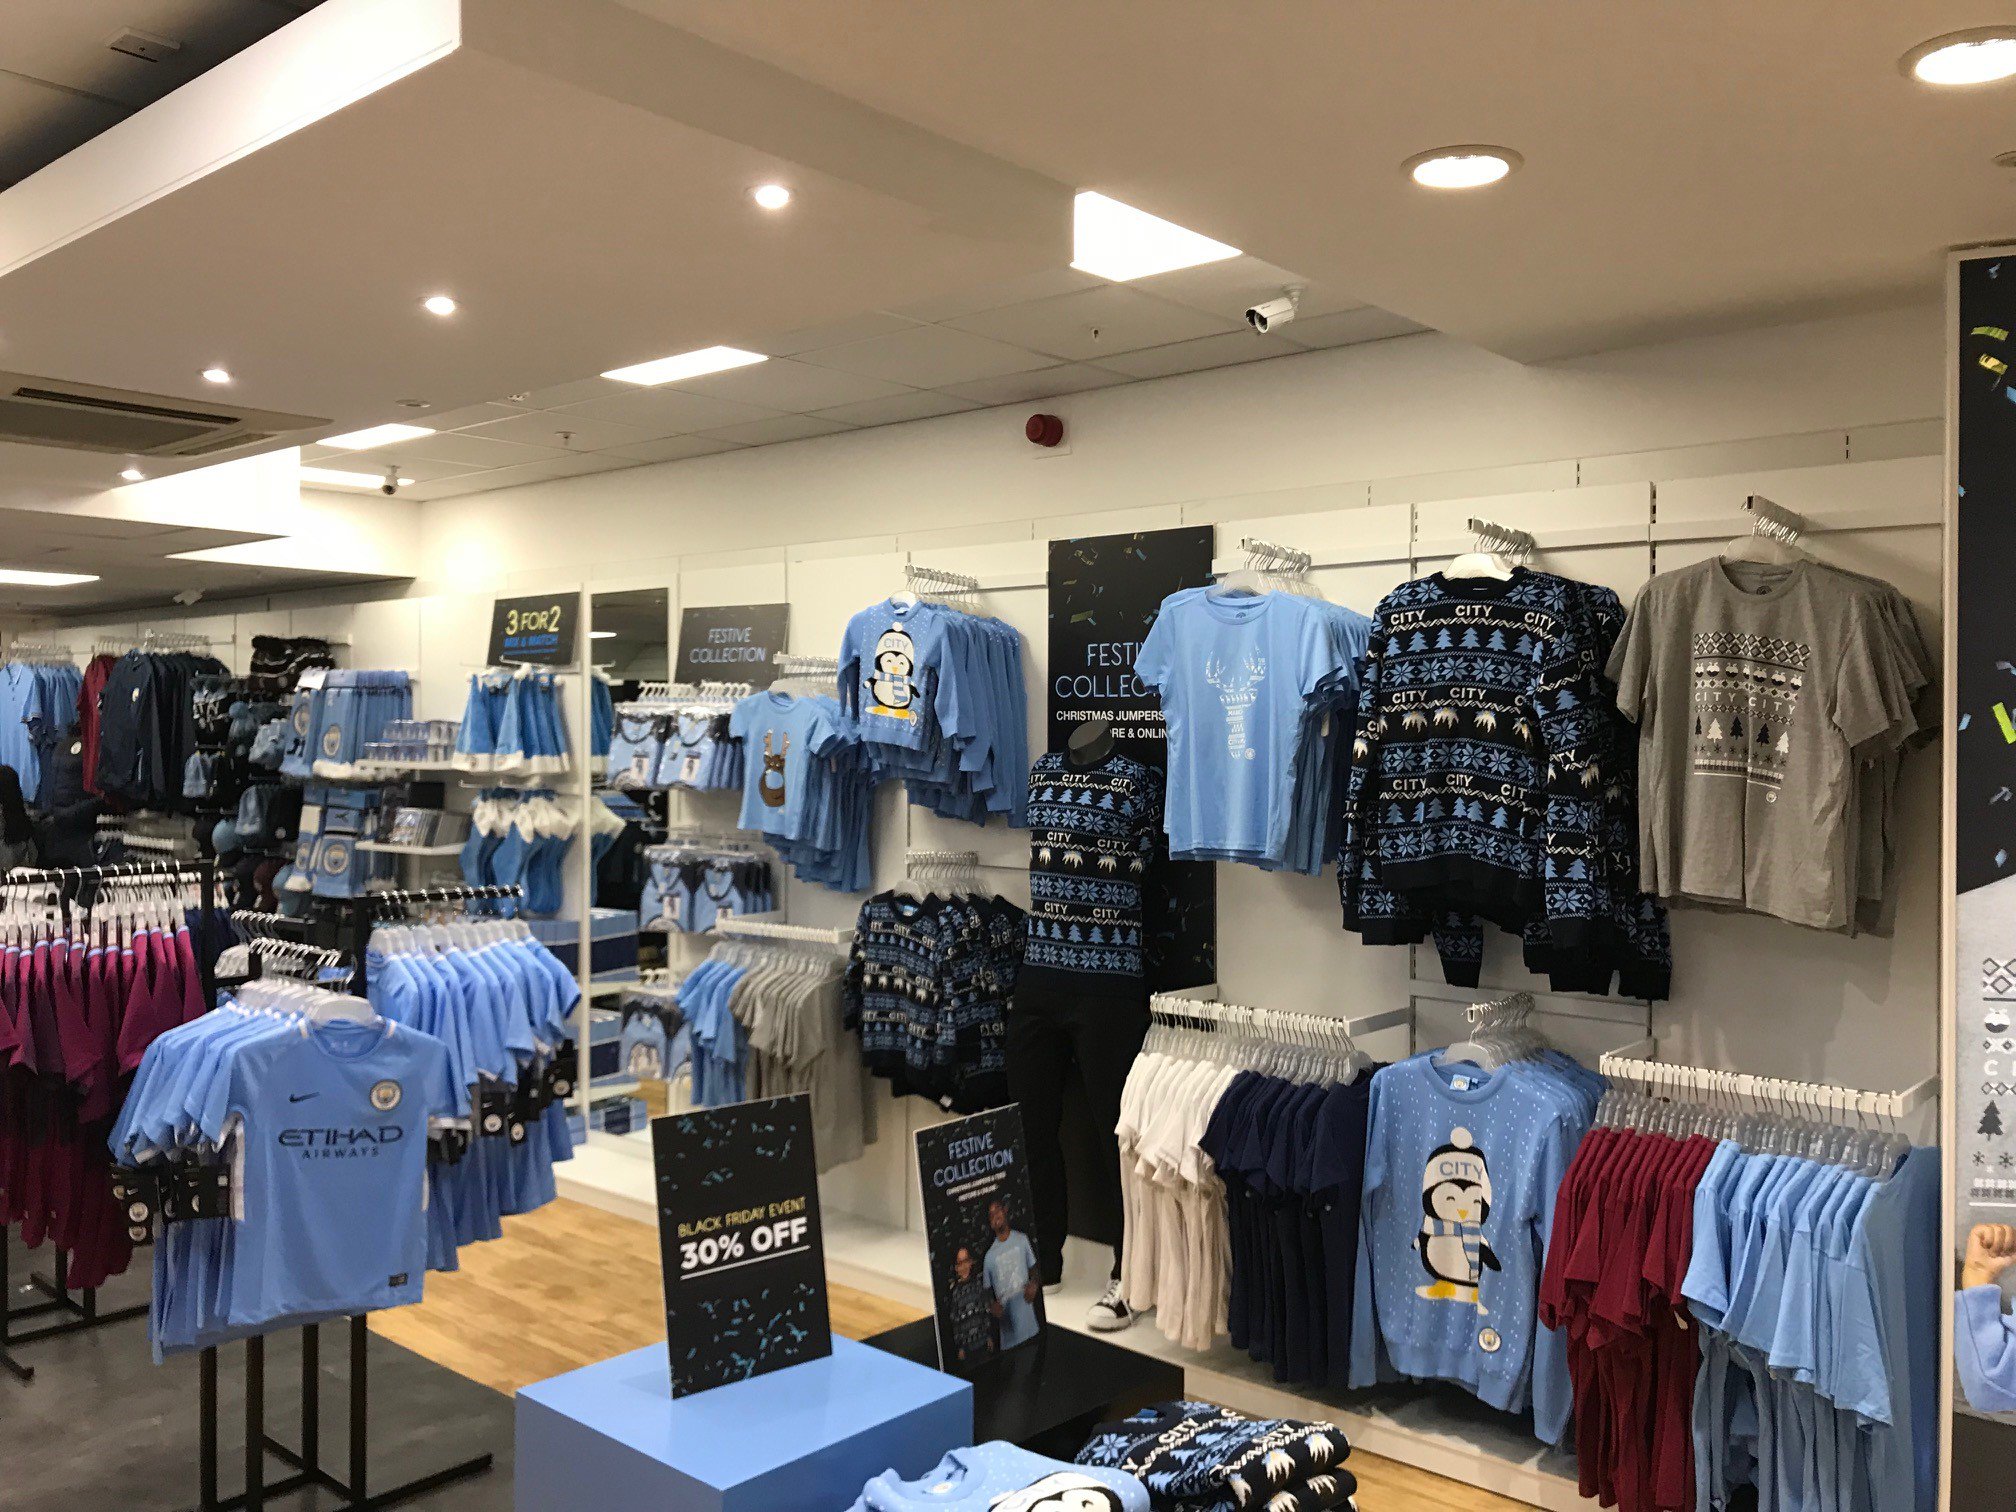 Vrijwel Luxe Sportman Manchester City on Twitter: "Our new City Store is now open in Manchester's  Arndale Centre with a 30% off #BlackFriday weekend deal! #mancity  https://t.co/Fq8RwuuEPA" / Twitter